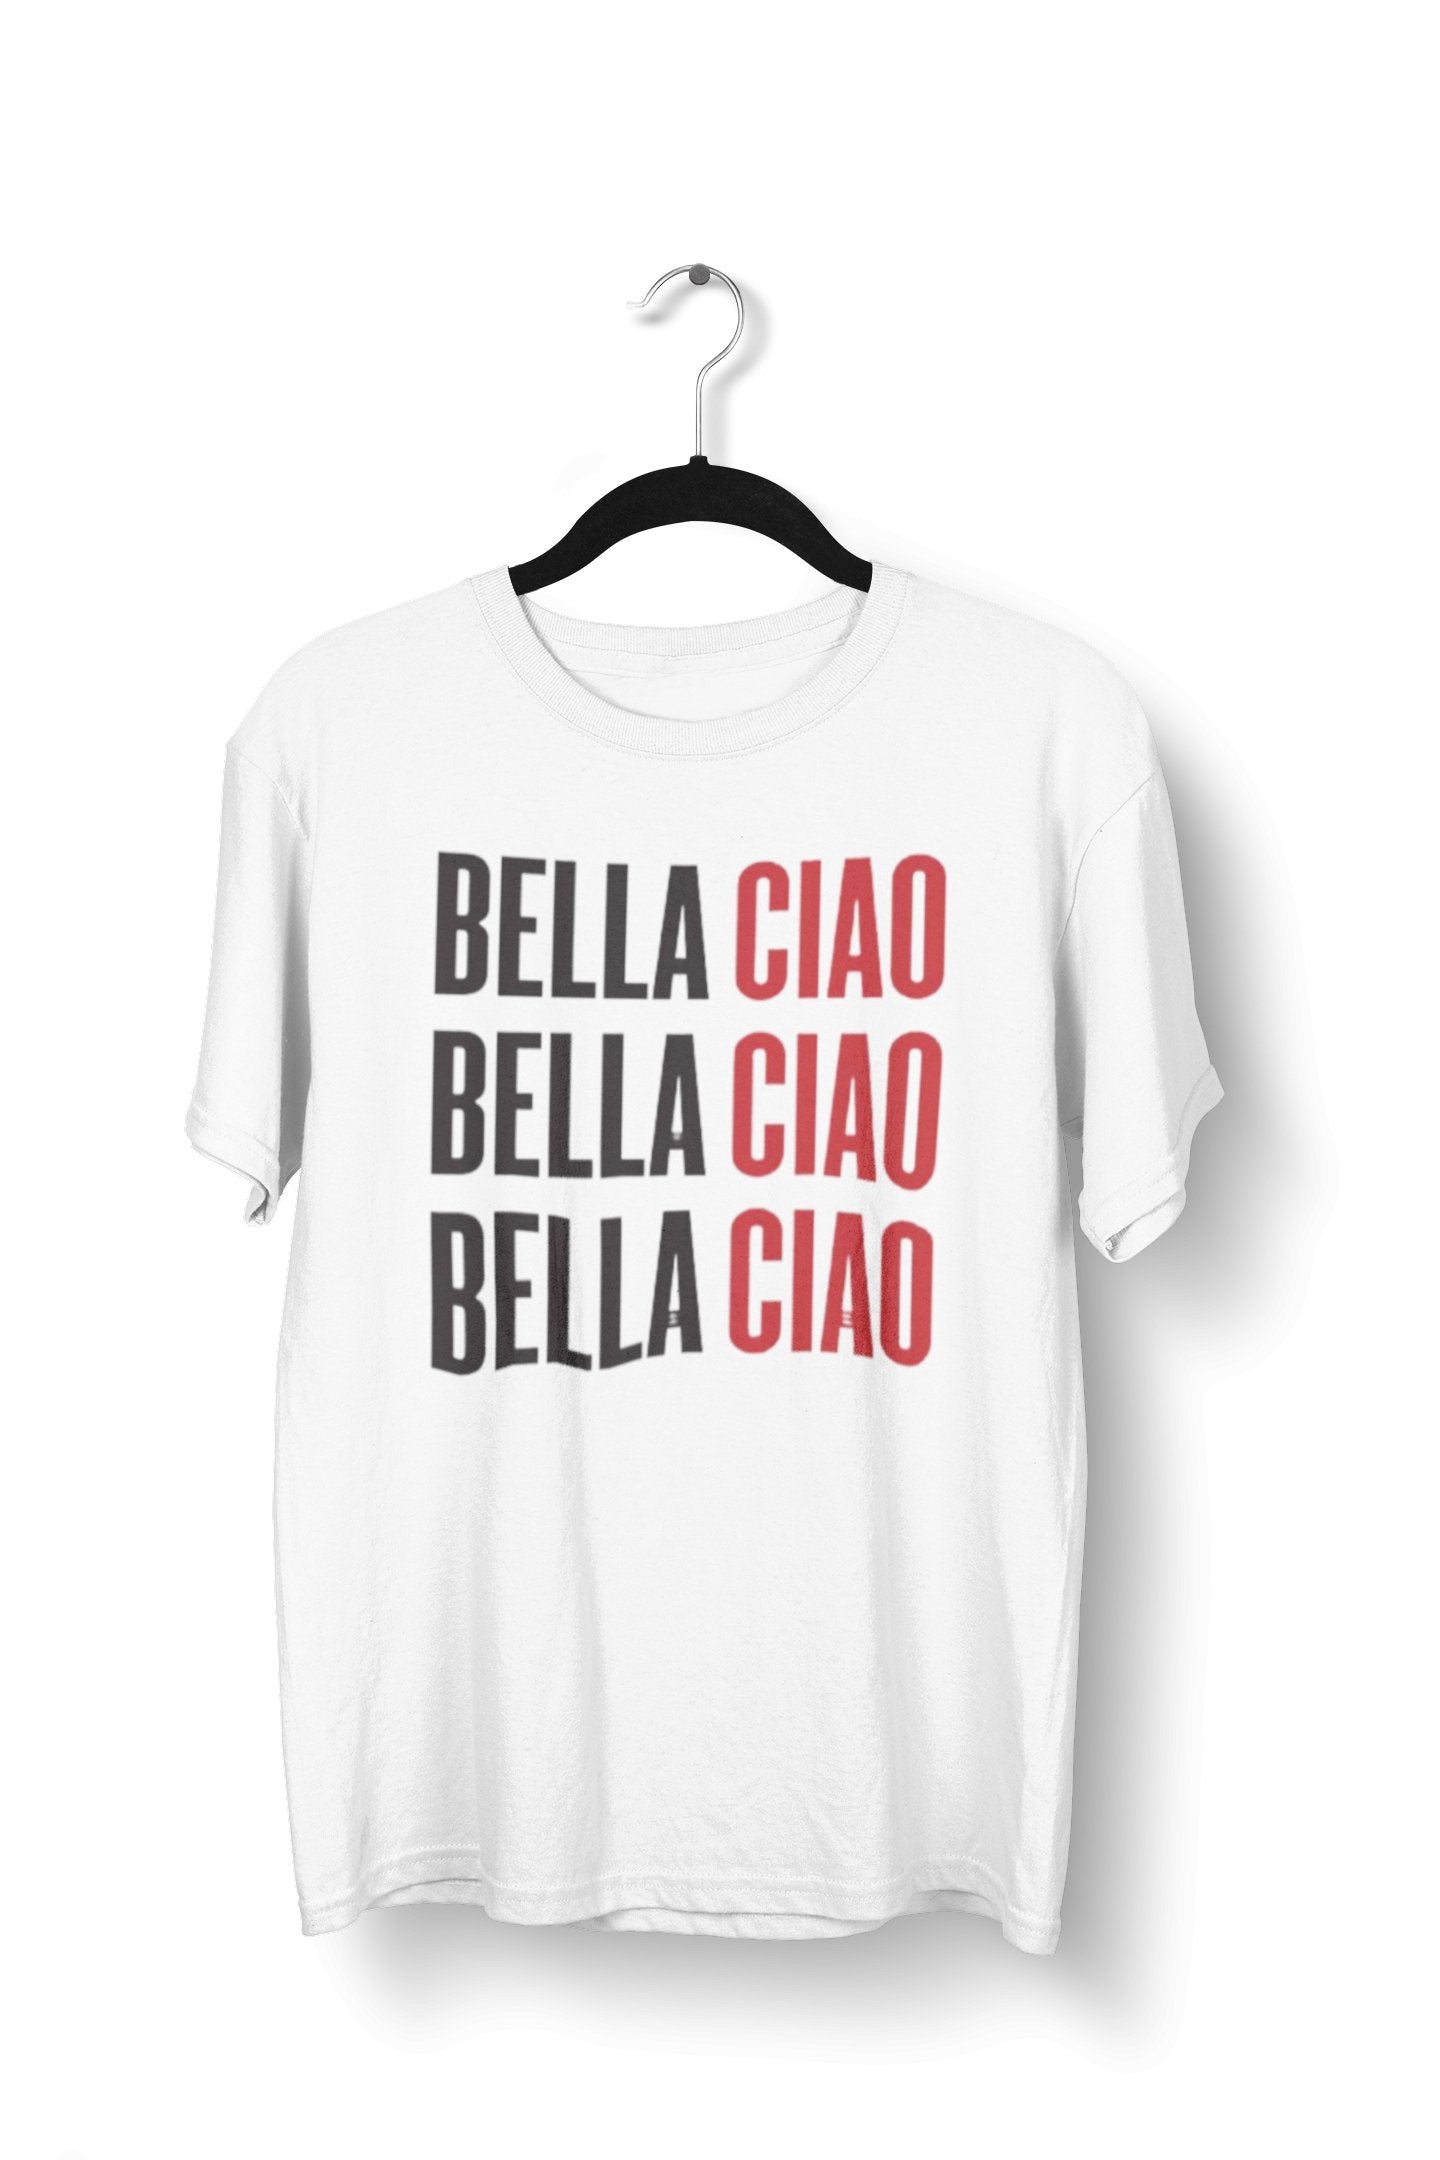 thelegalgang,Bella Ciao Money Heist T Shirt for Men,.